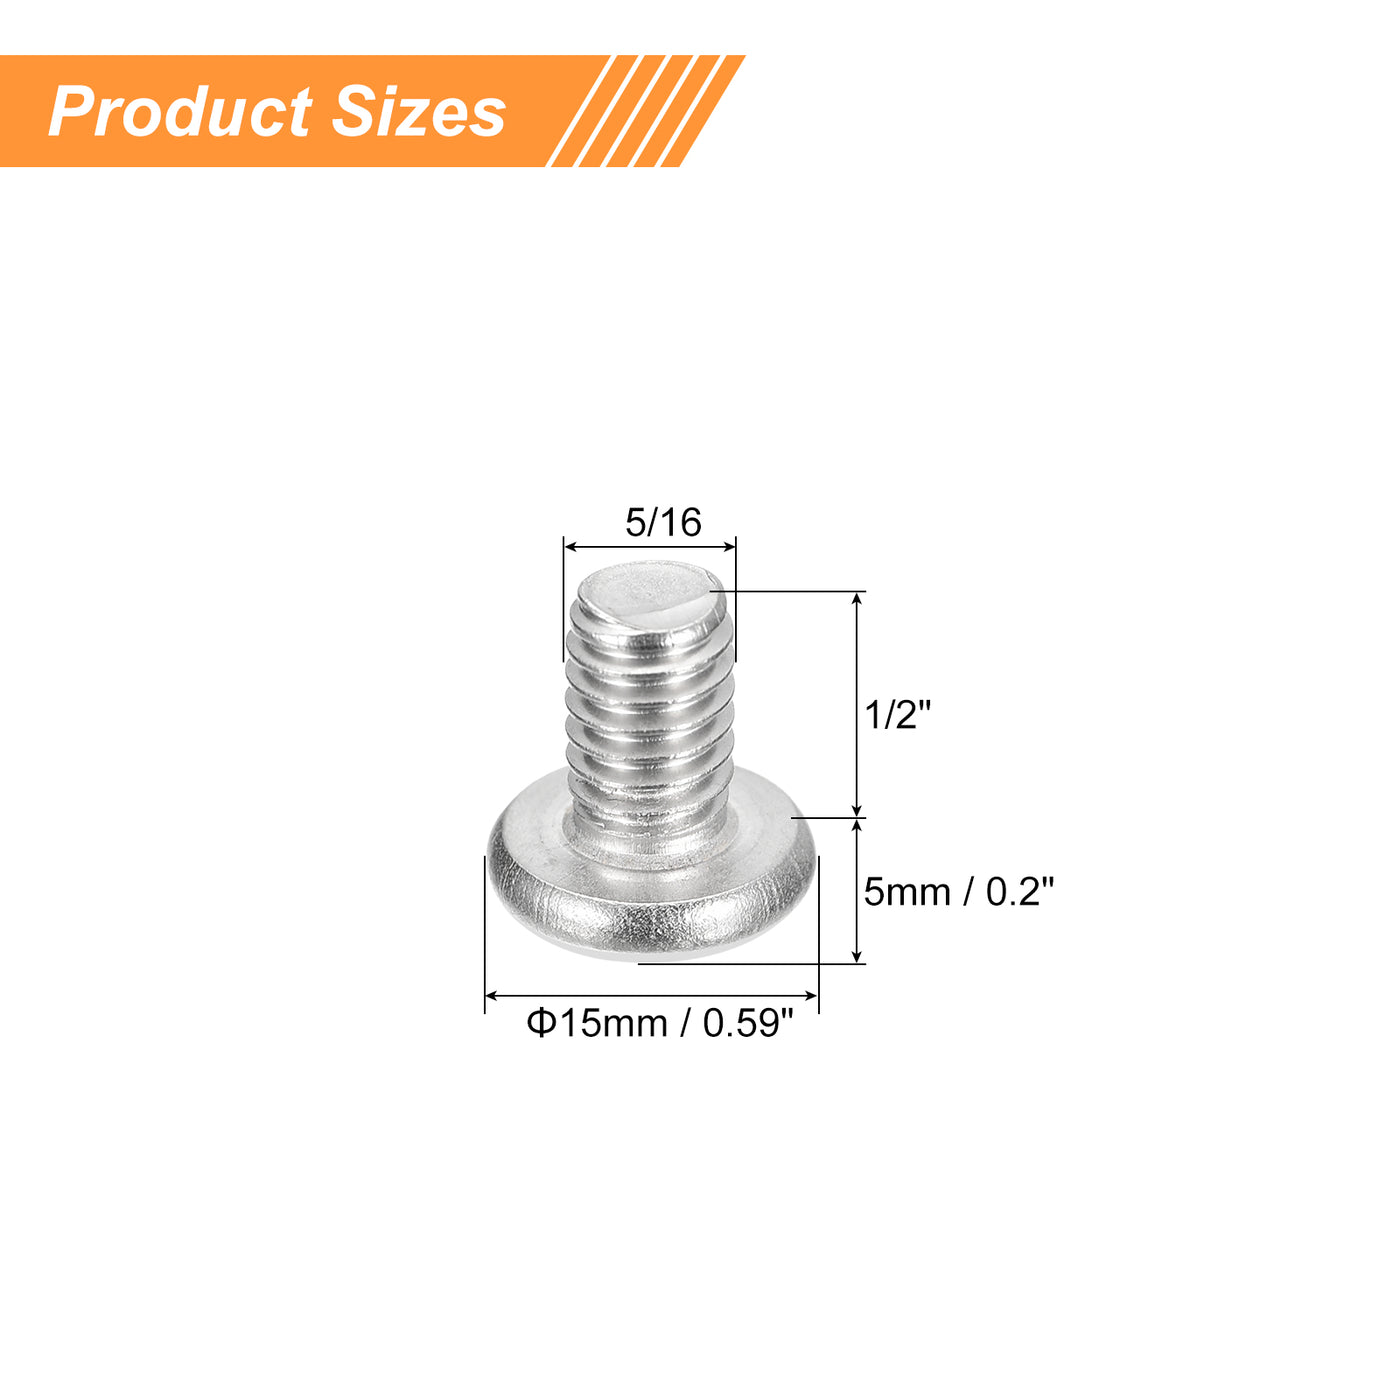 uxcell Uxcell 5/16-18x1/2" Pan Head Machine Screws, Stainless Steel 18-8 Screw, Pack of 10